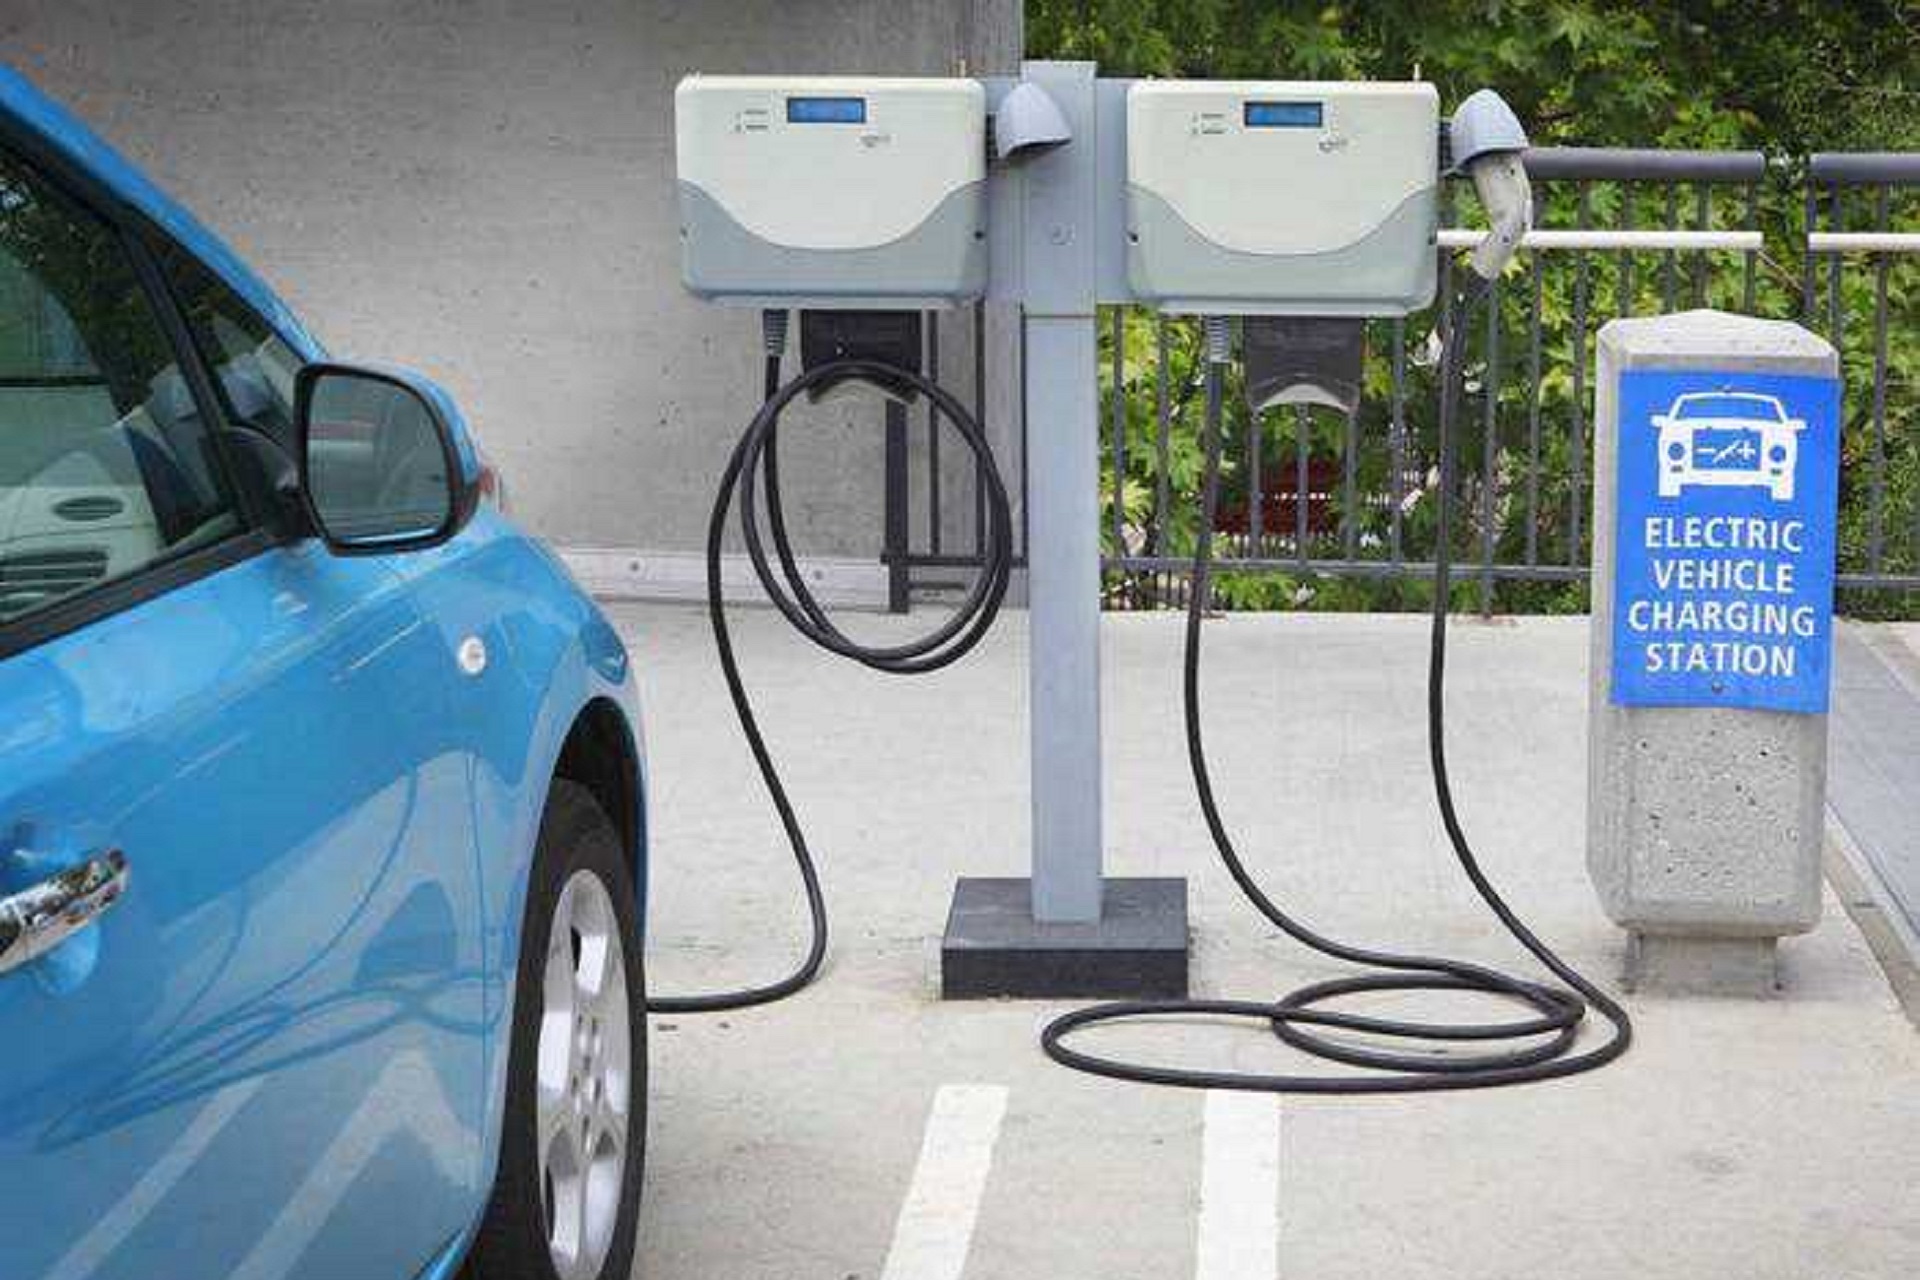 IOC, Other PSUs Setting Up EV Charging Stations Likely To Facilitate EV Adoption